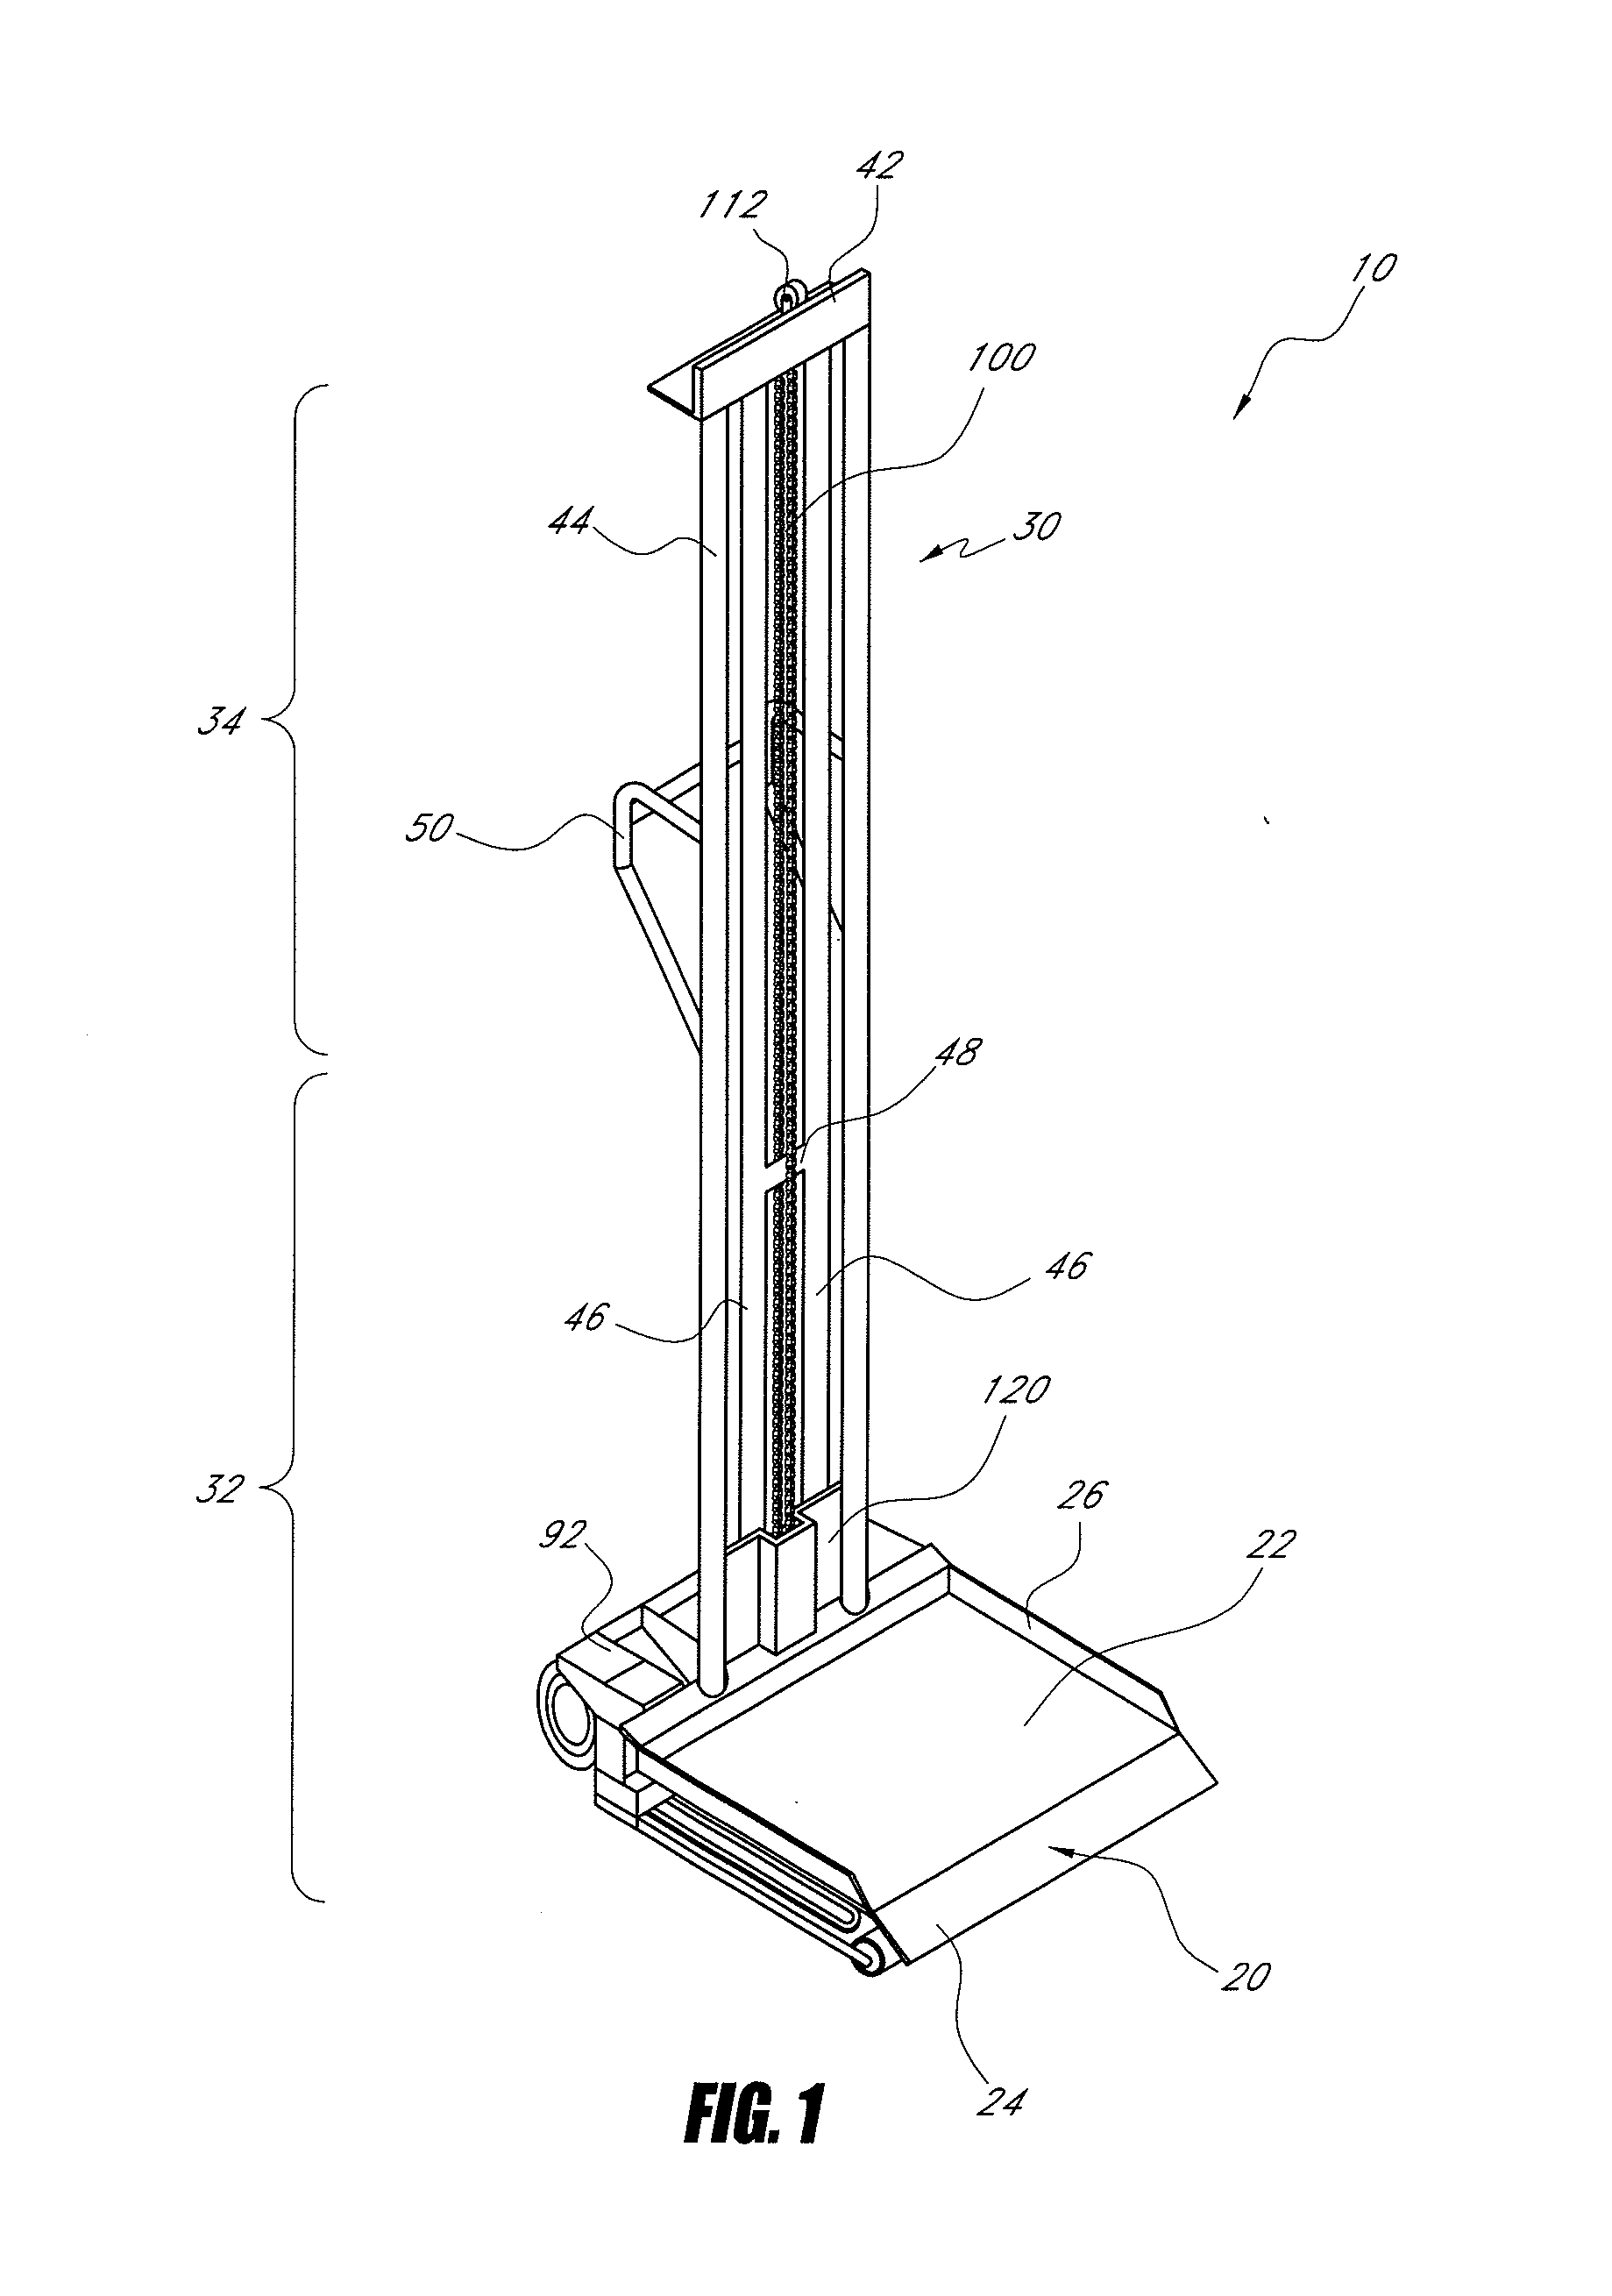 Powered hand truck with vertically movable platform